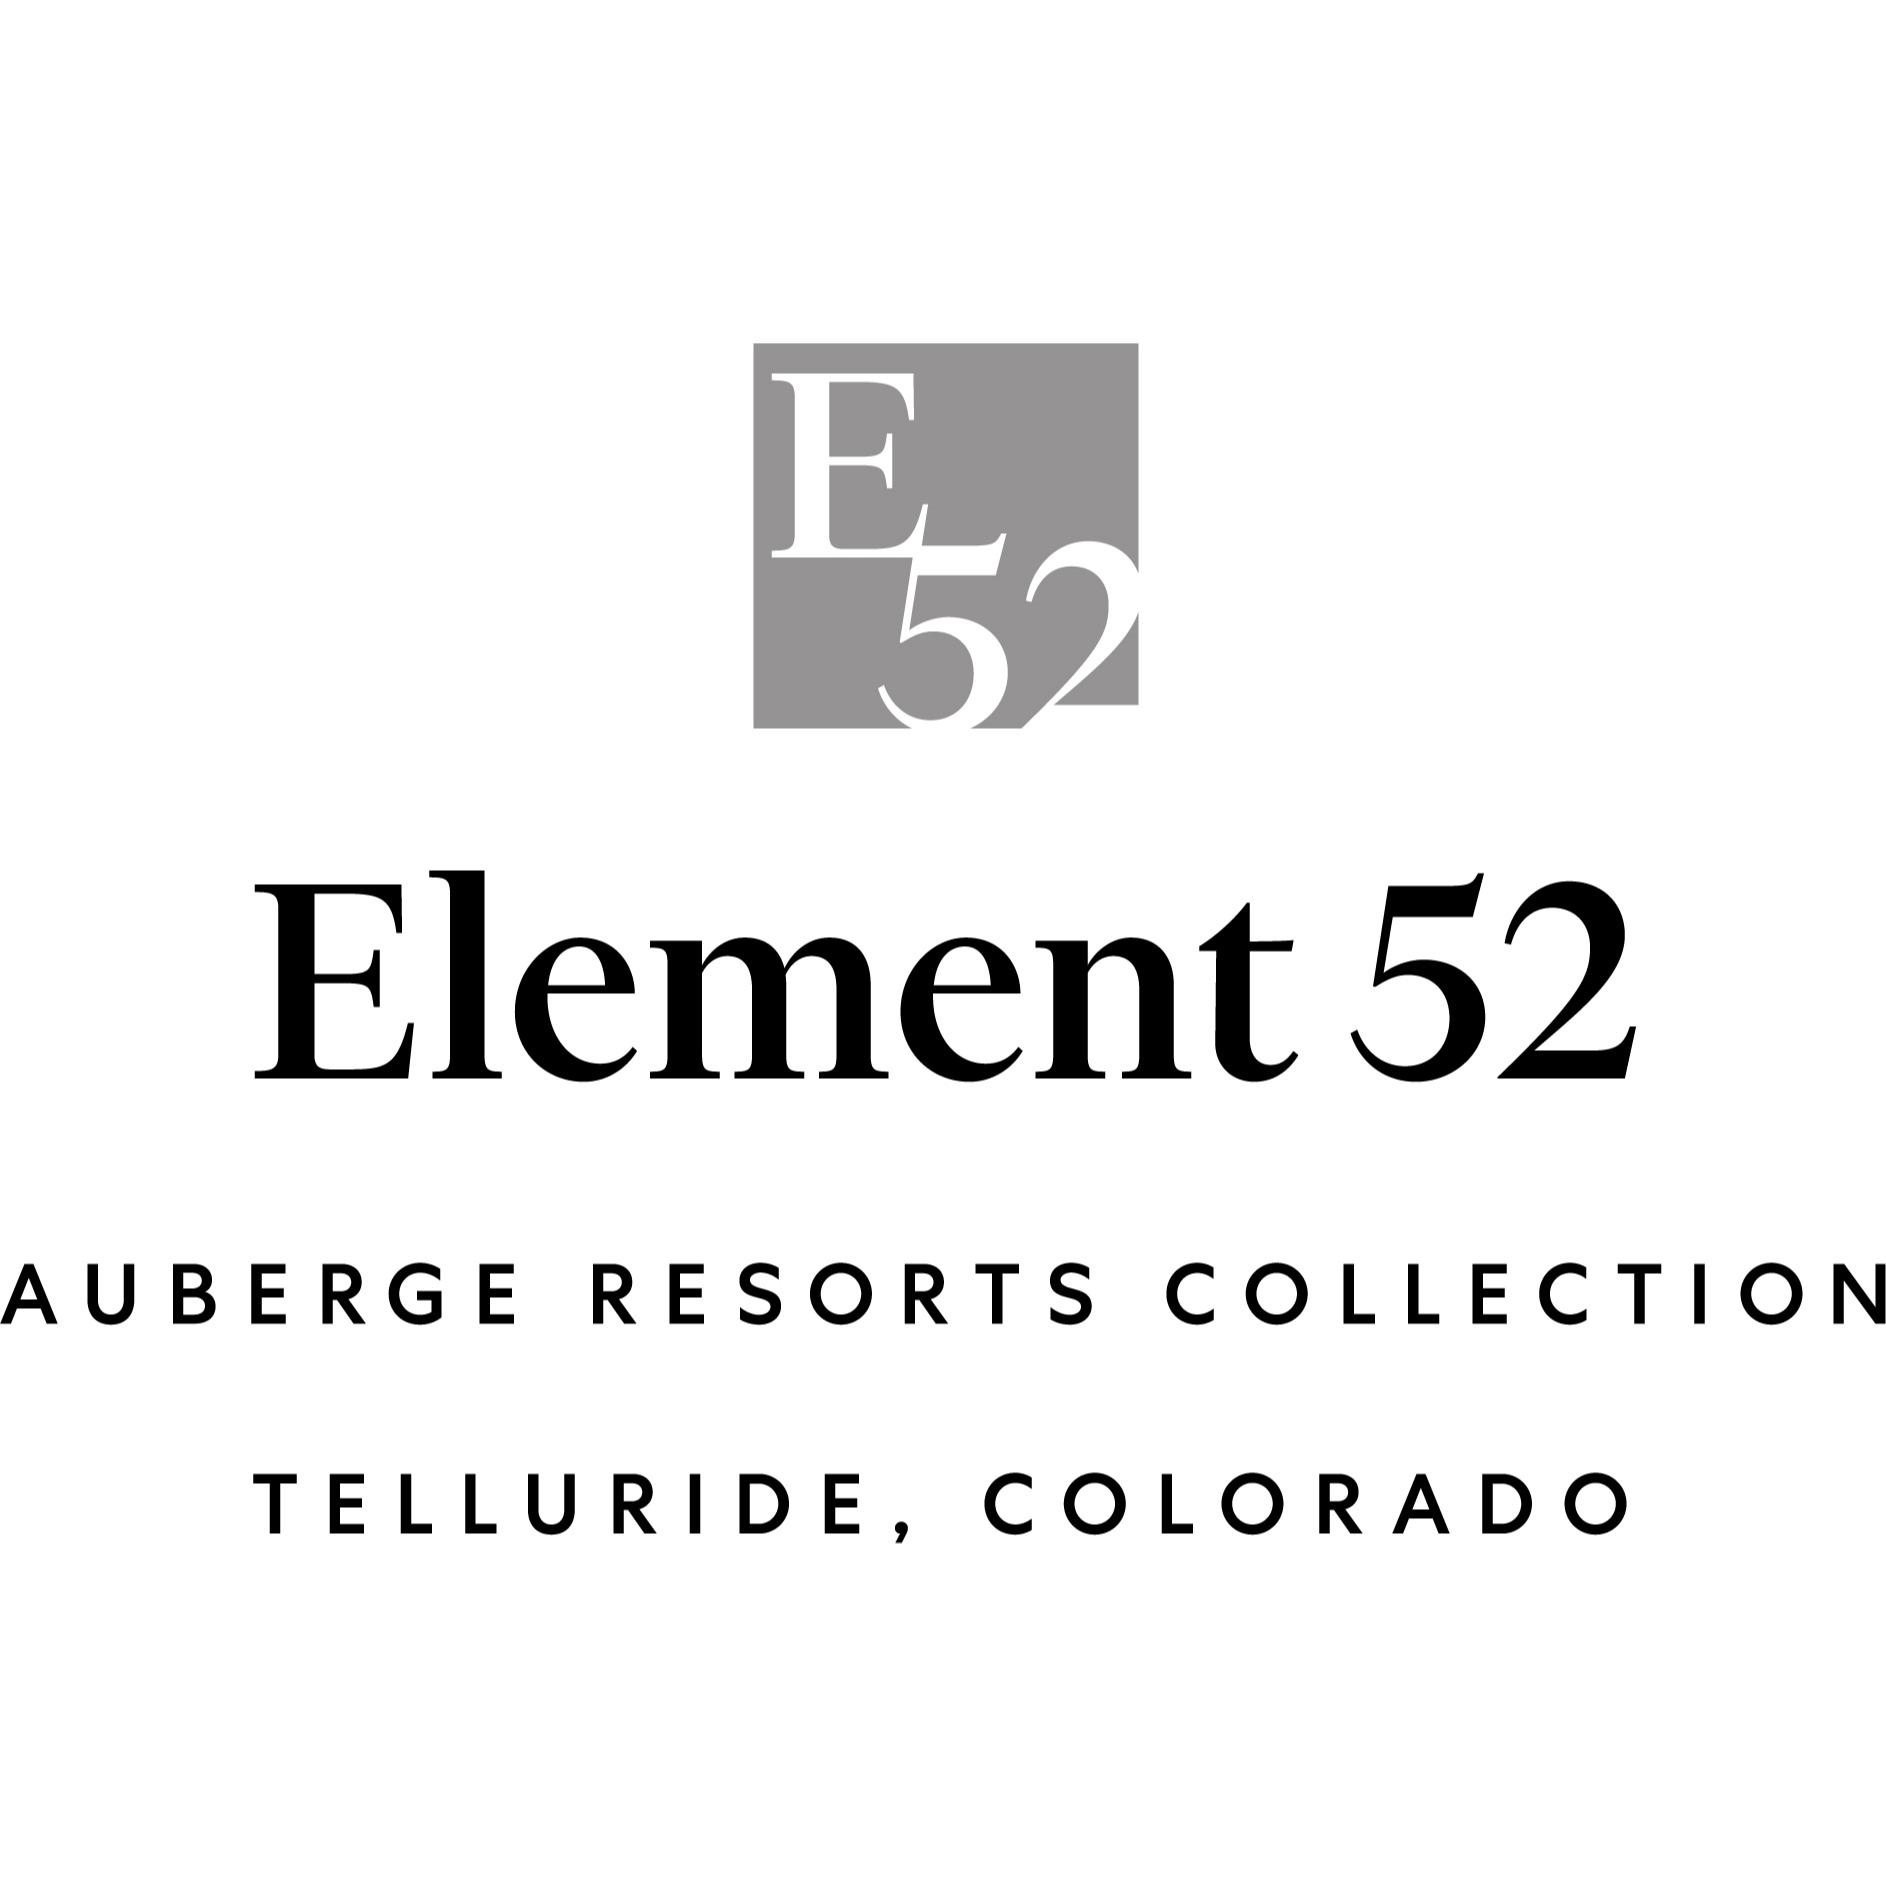 Element 52, Auberge Resorts Collection - Telluride, CO 81435 - (970)728-0701 | ShowMeLocal.com